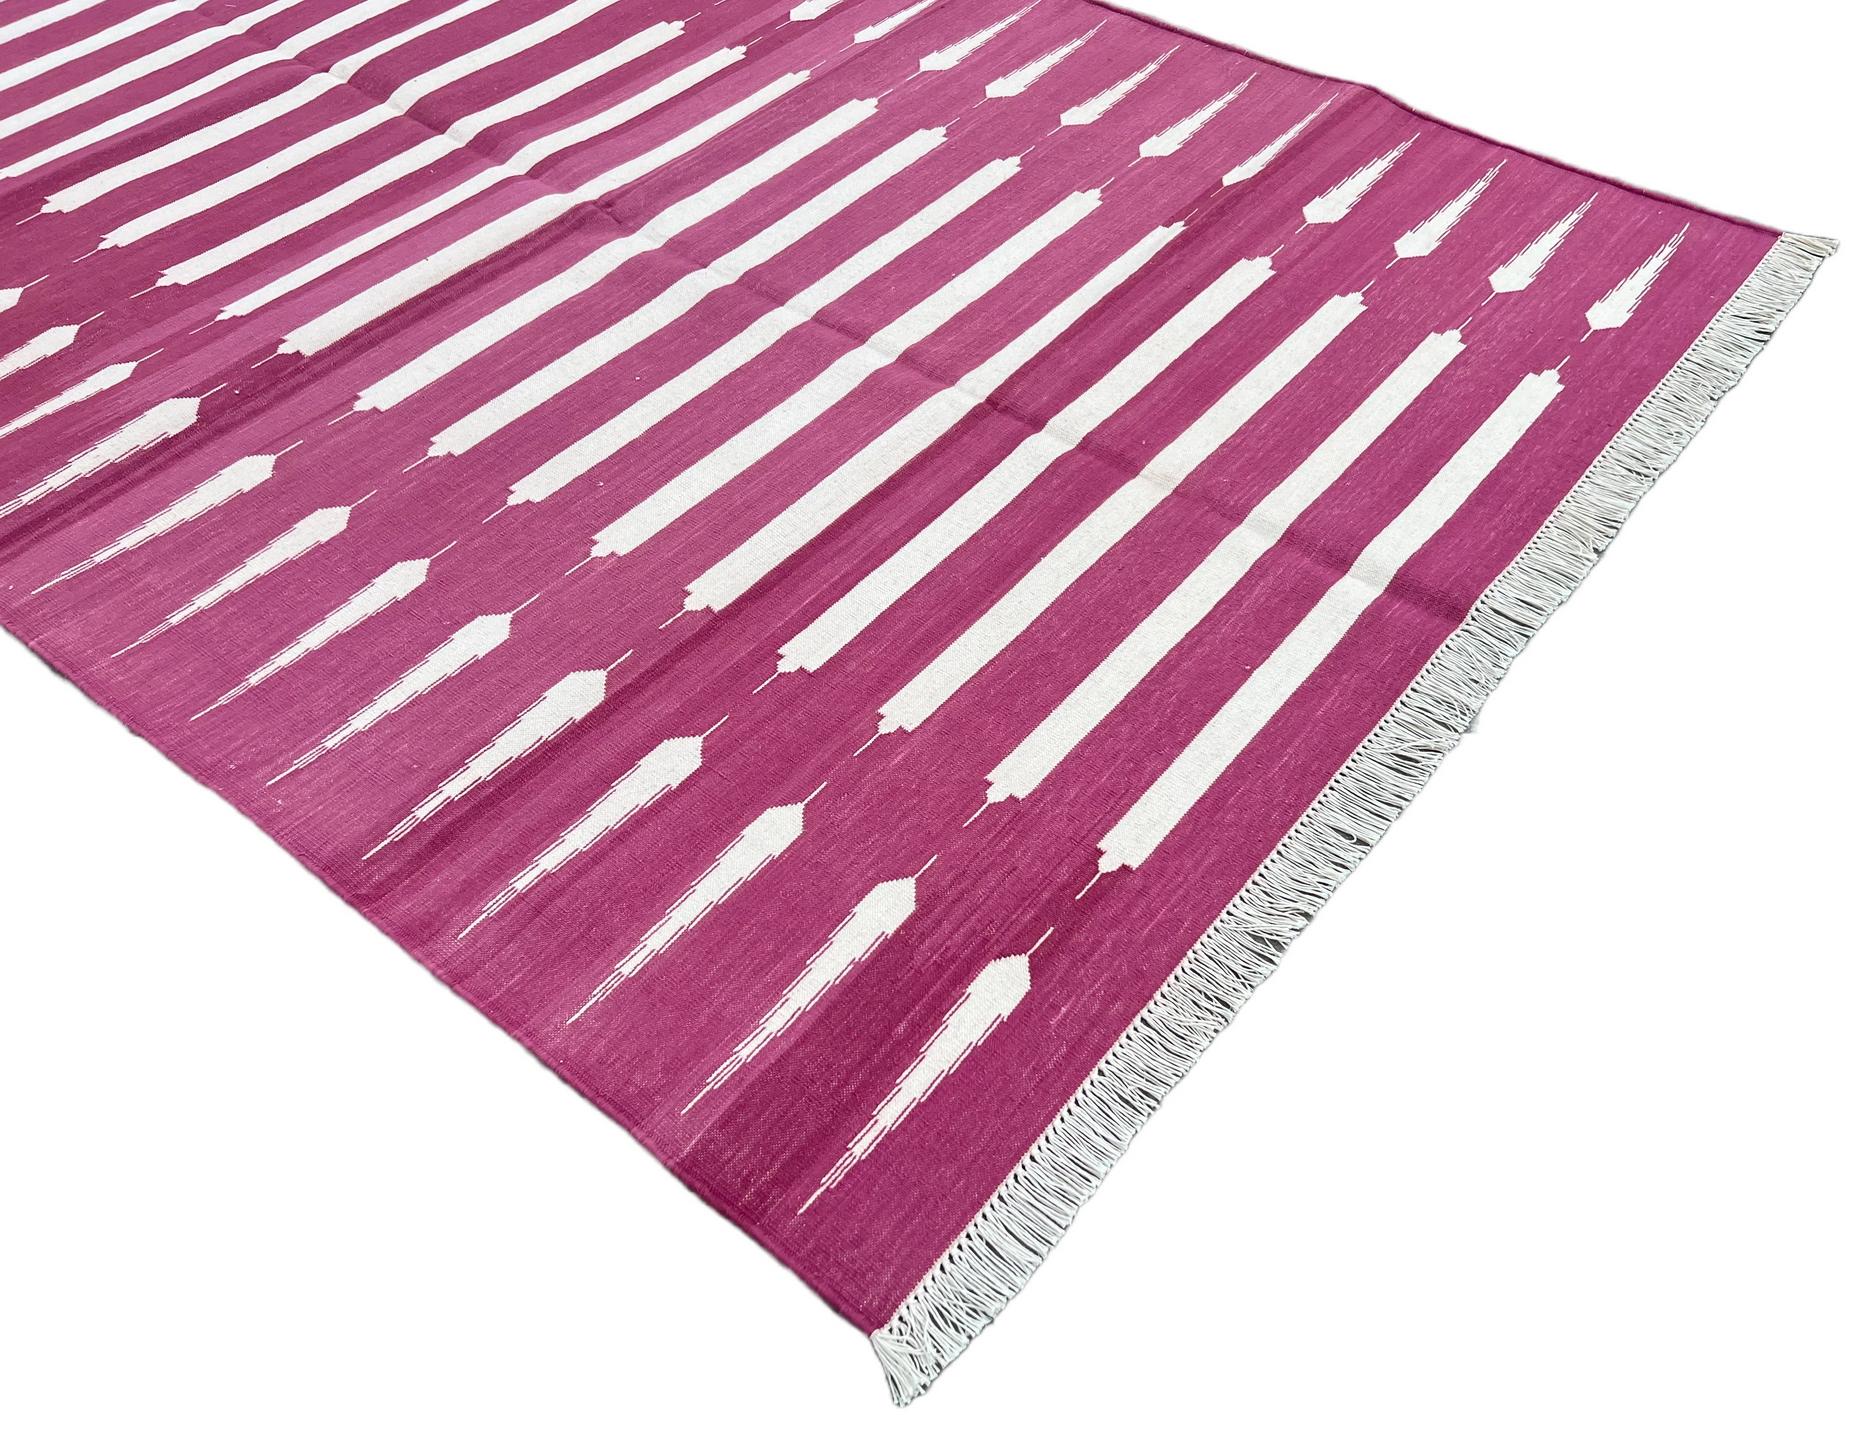 Hand-Woven Handmade Cotton Area Flat Weave Rug, 4x6 Pink And White Striped Indian Dhurrie For Sale